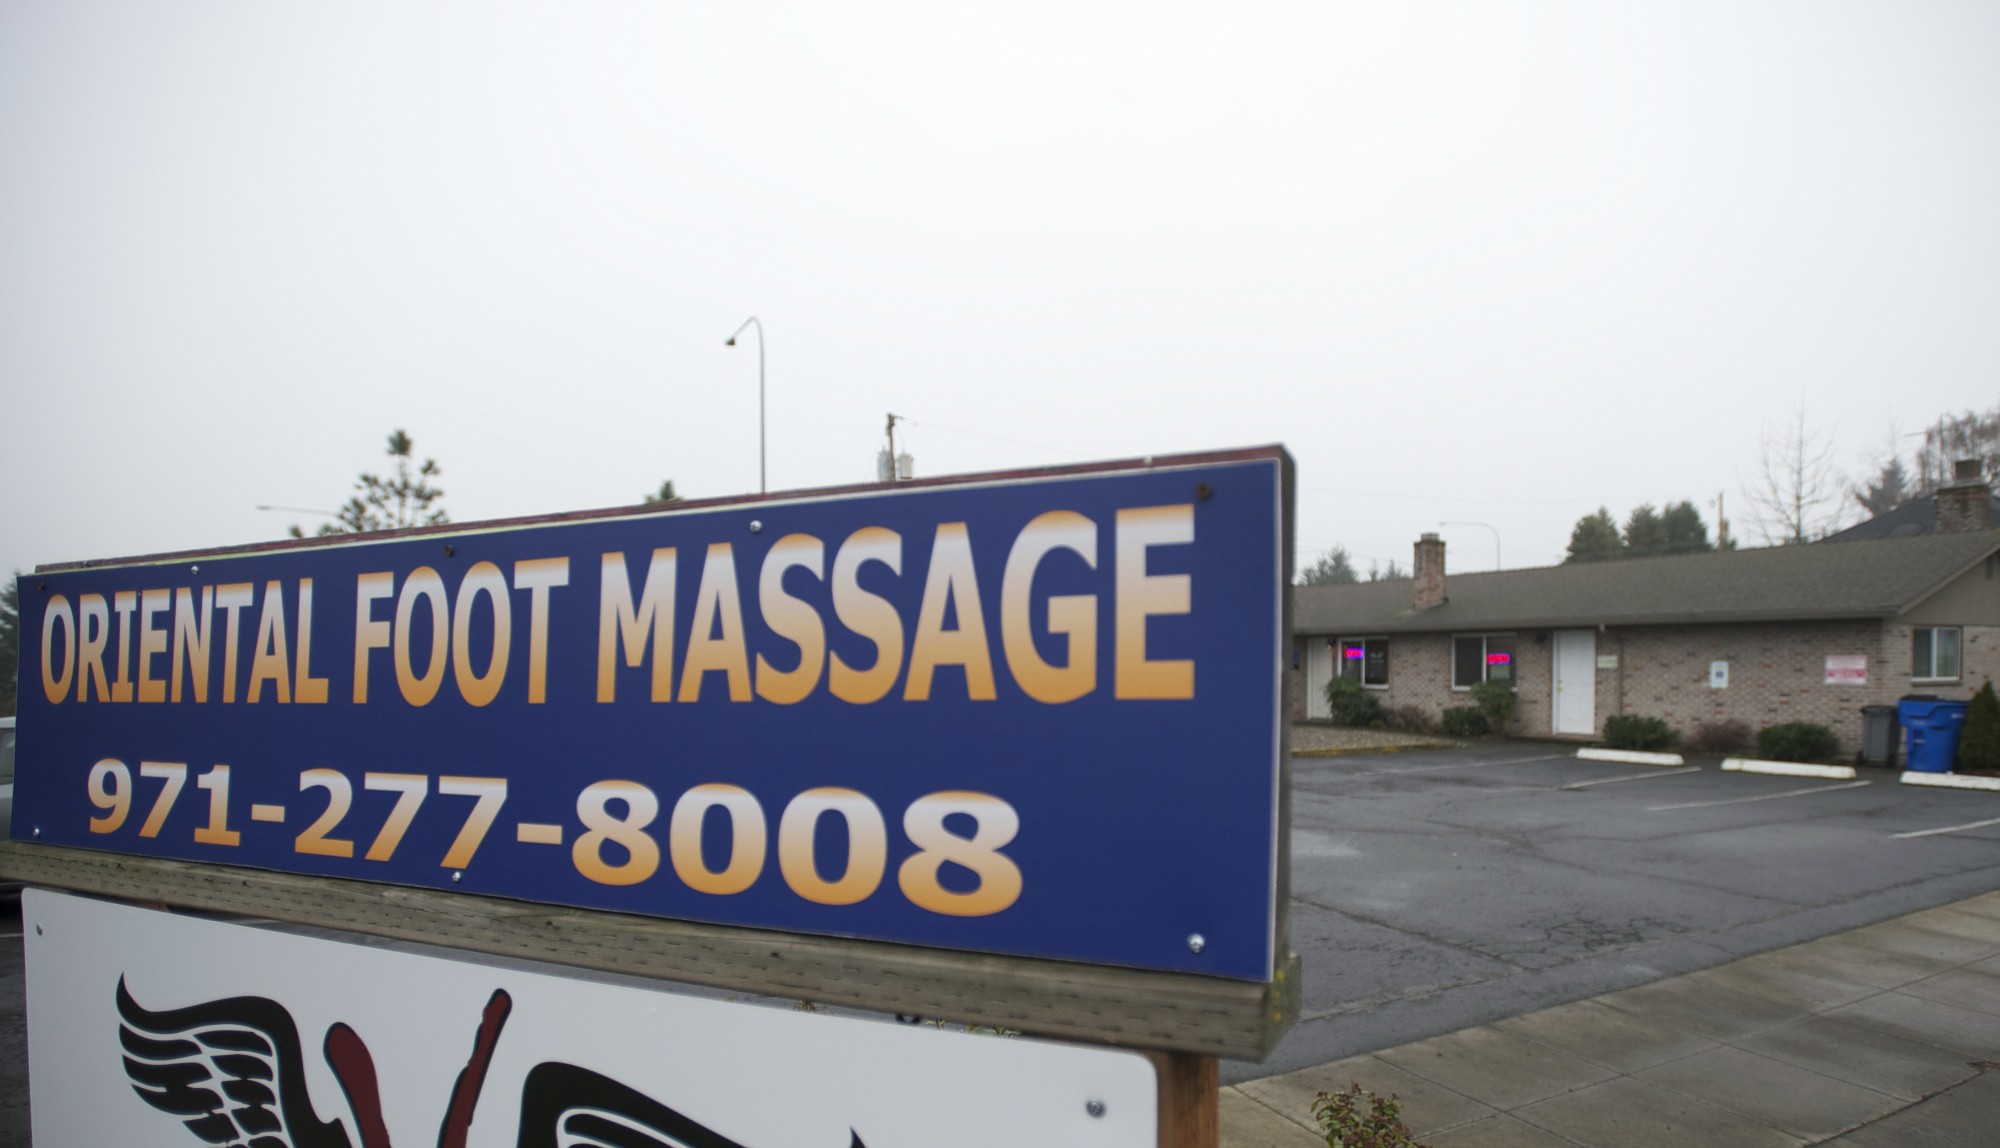 Rainbow Massage, which has since closed, greeted people as they entered the Shumway neighborhood via H Street.